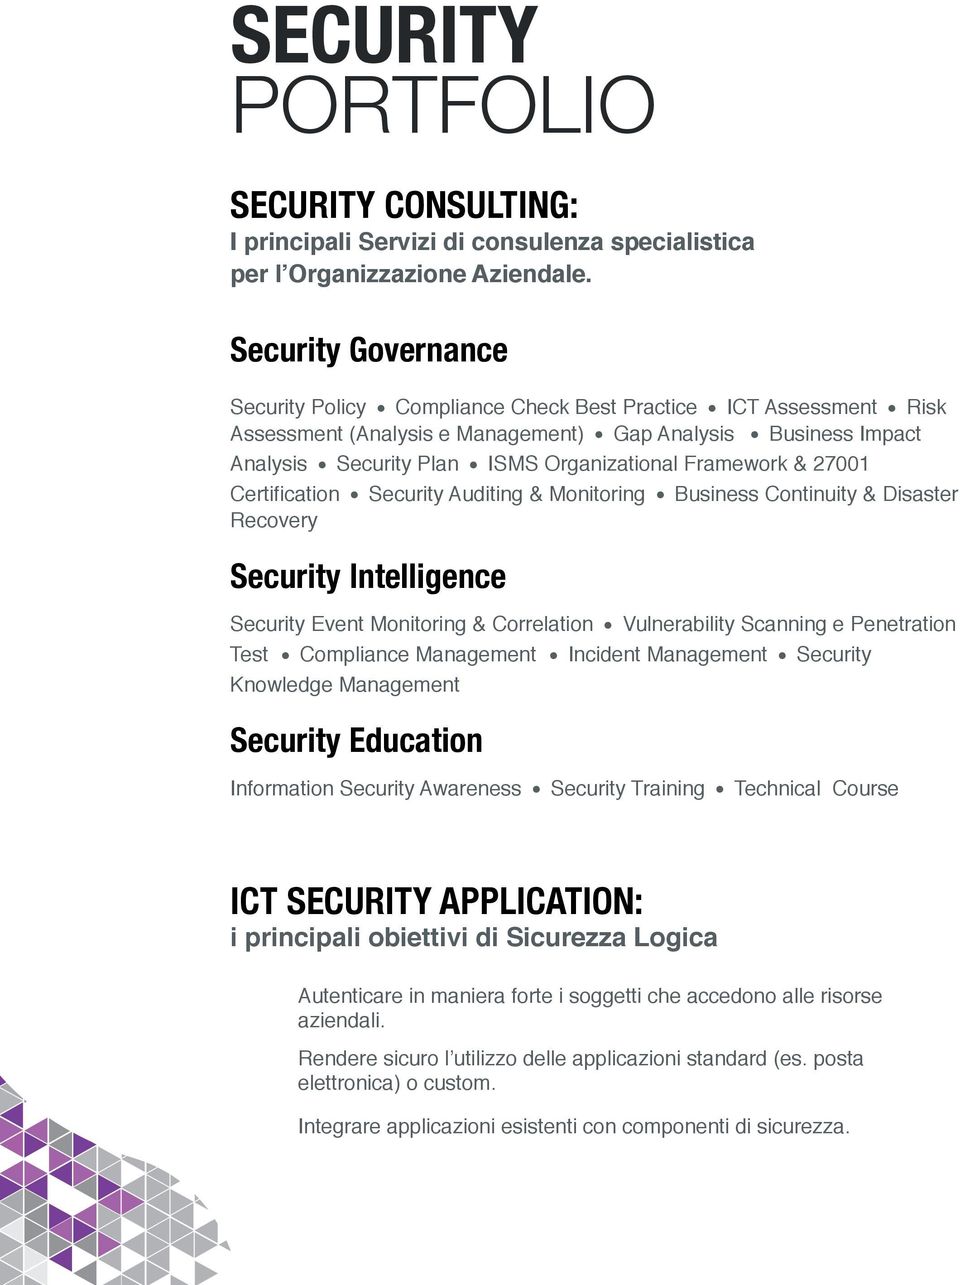 Framework & 27001 Certification Security Auditing & Monitoring Recovery Security Intelligence Security Event Monitoring & Correlation Business Continuity & Disaster Vulnerability Scanning e